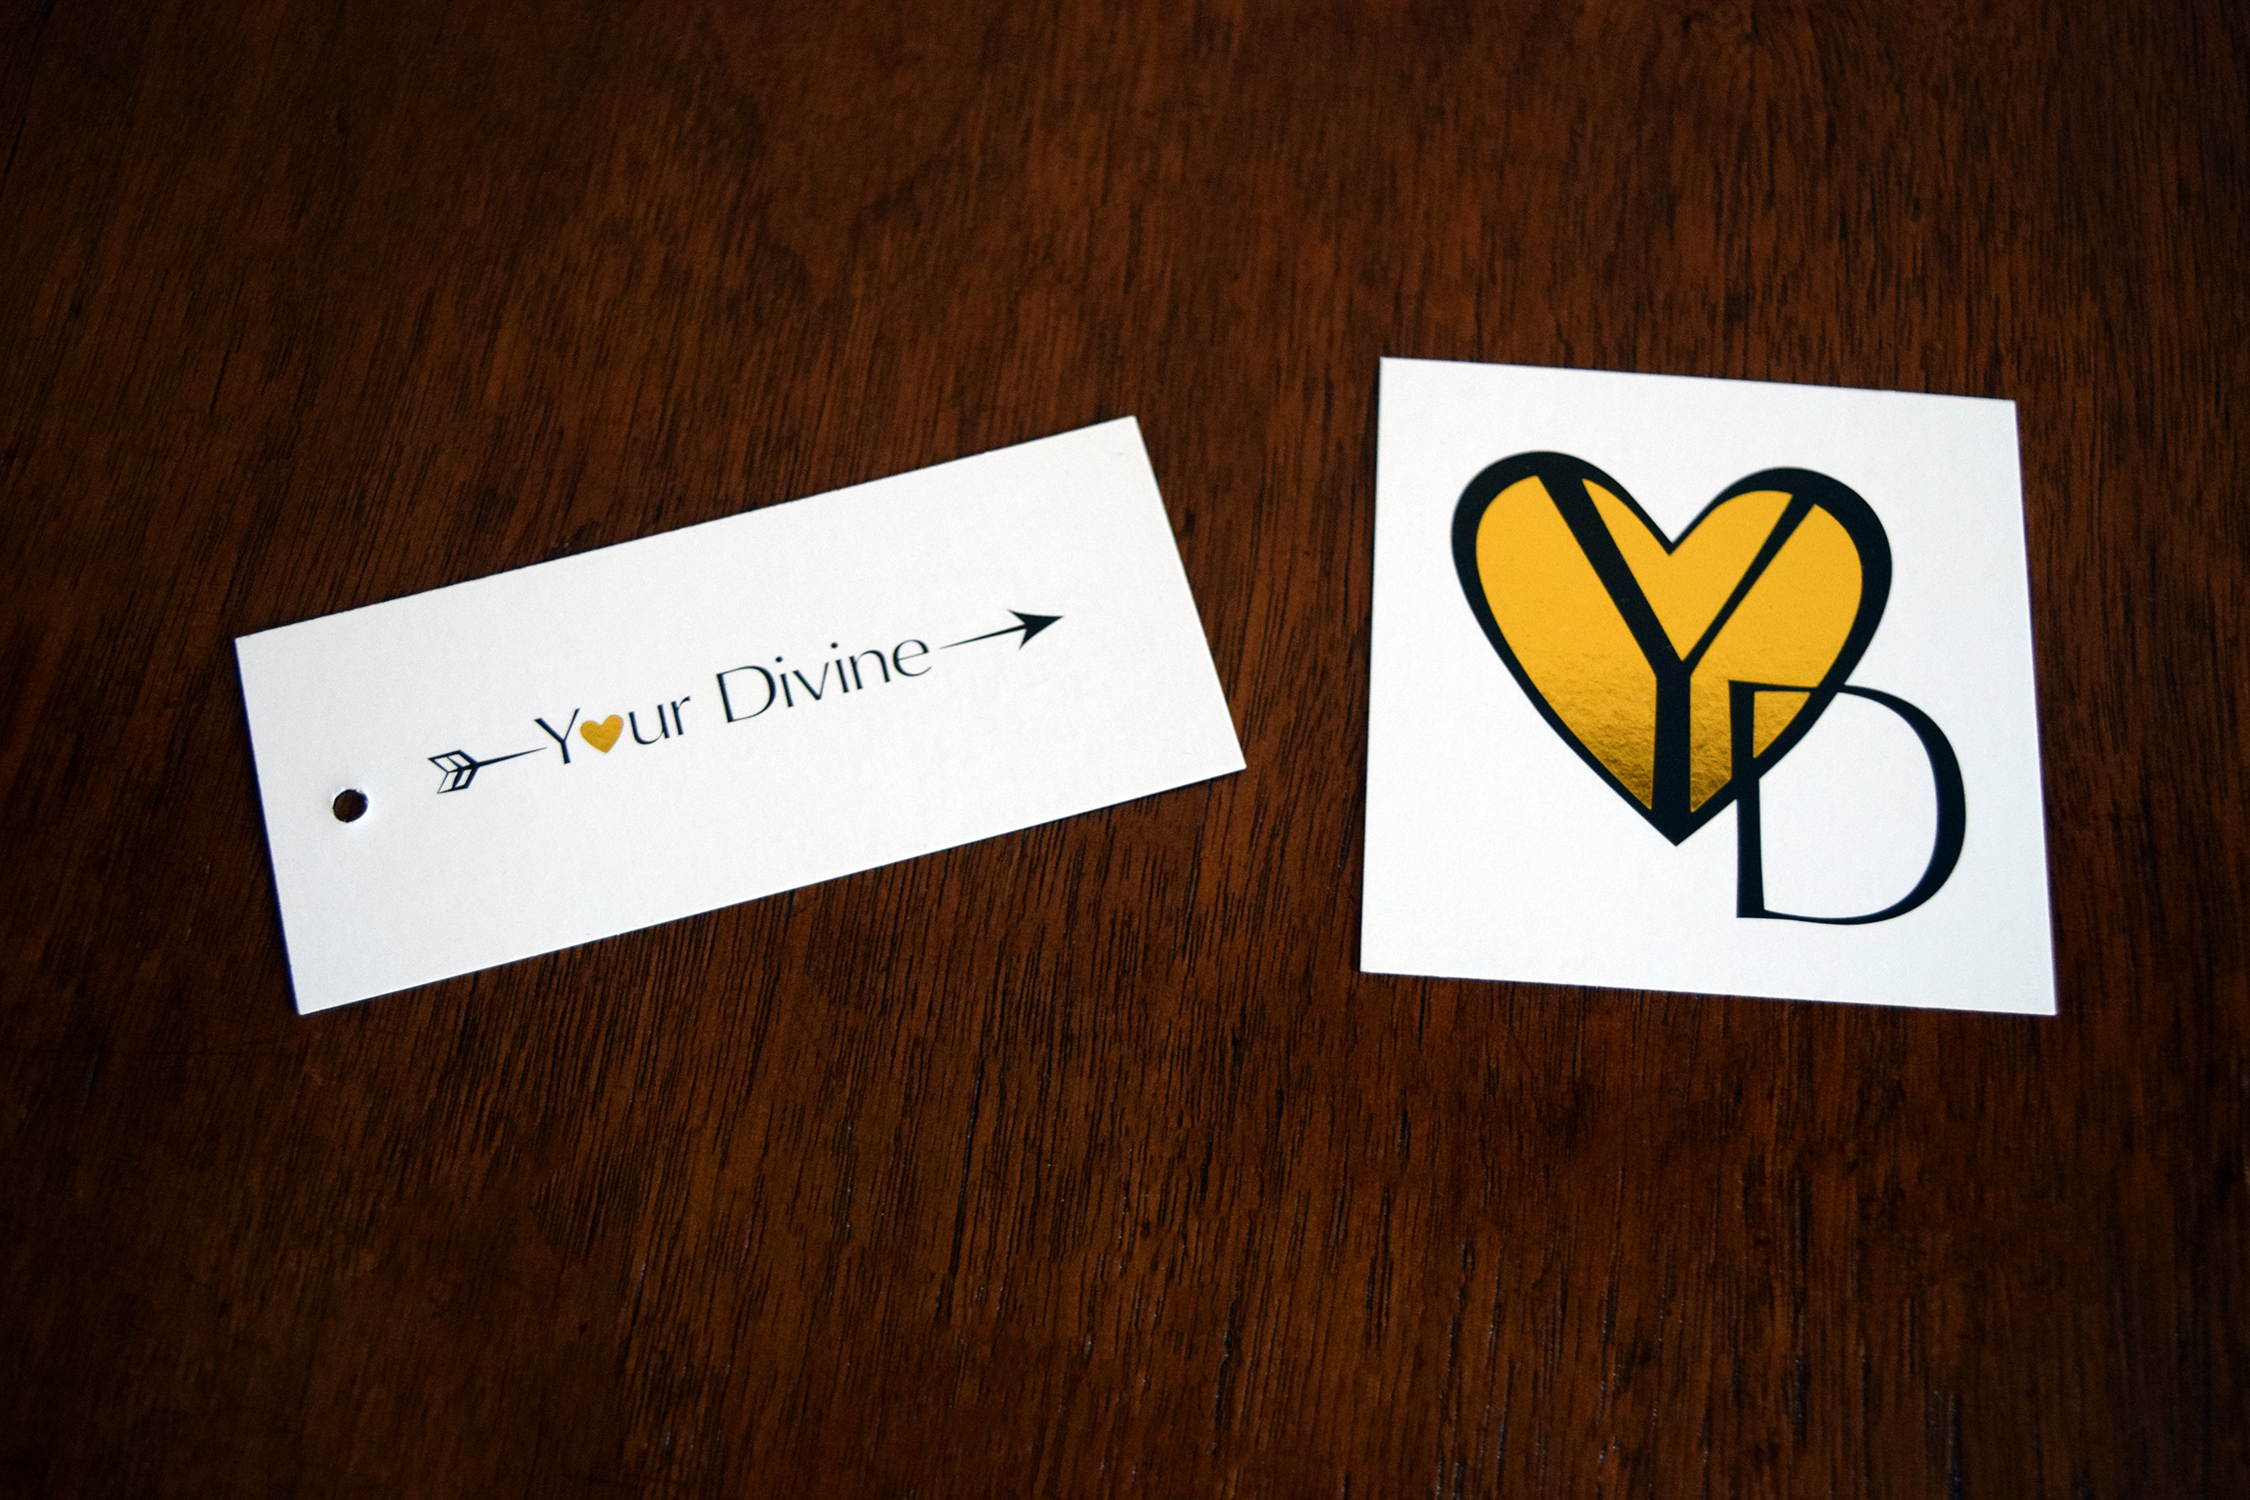 Your Divine Business Card and Apparel Tag